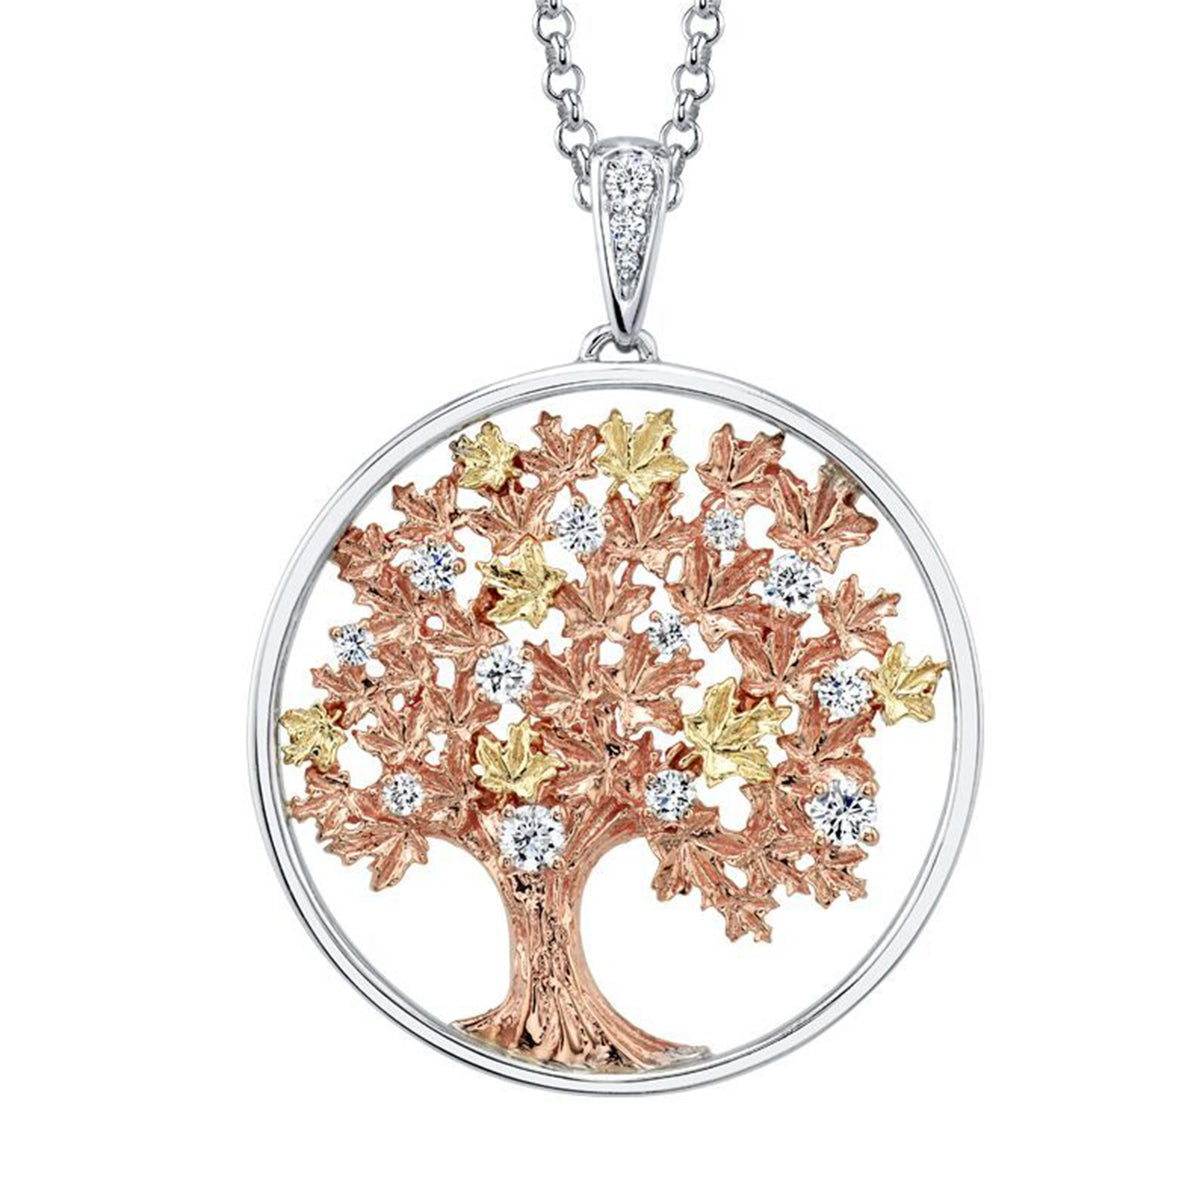 Crafted in 14KT rose, white and yellow Certified Canadian Gold, this pendant features a maple tree set with round brilliant-cut Canadian diamonds. 